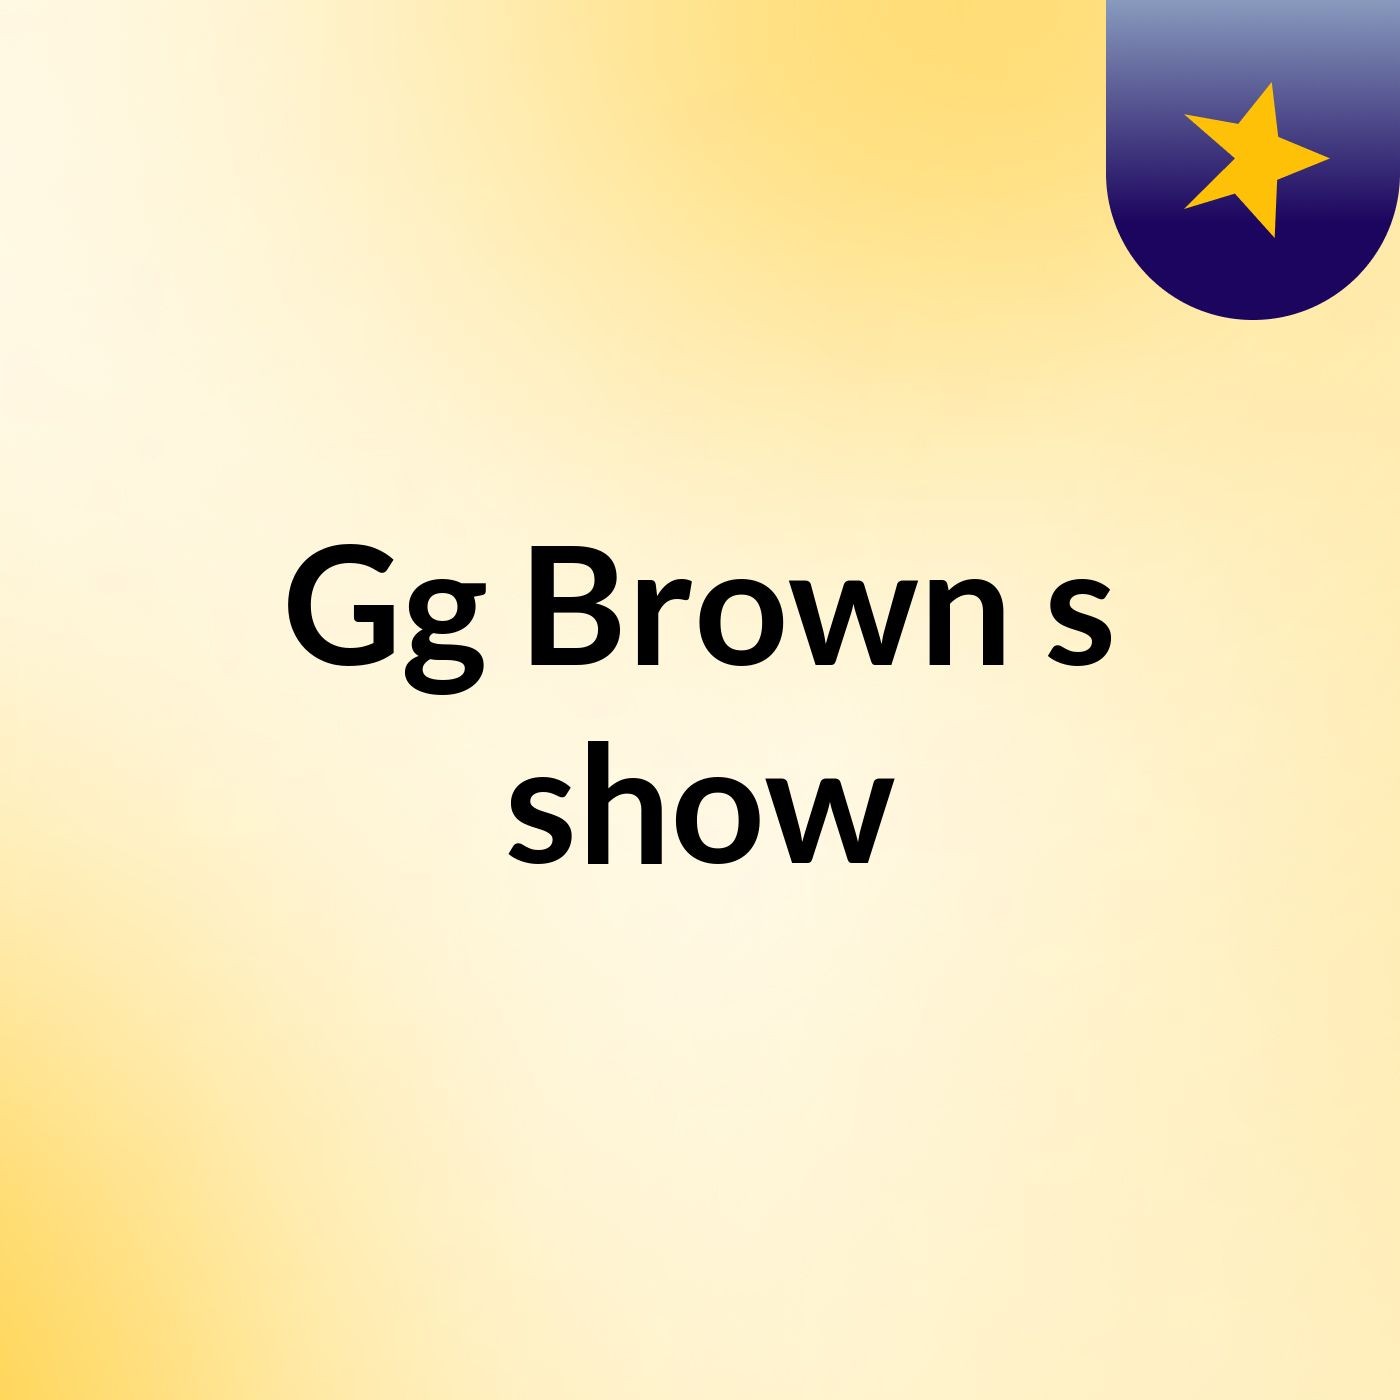 Gg Brown's show